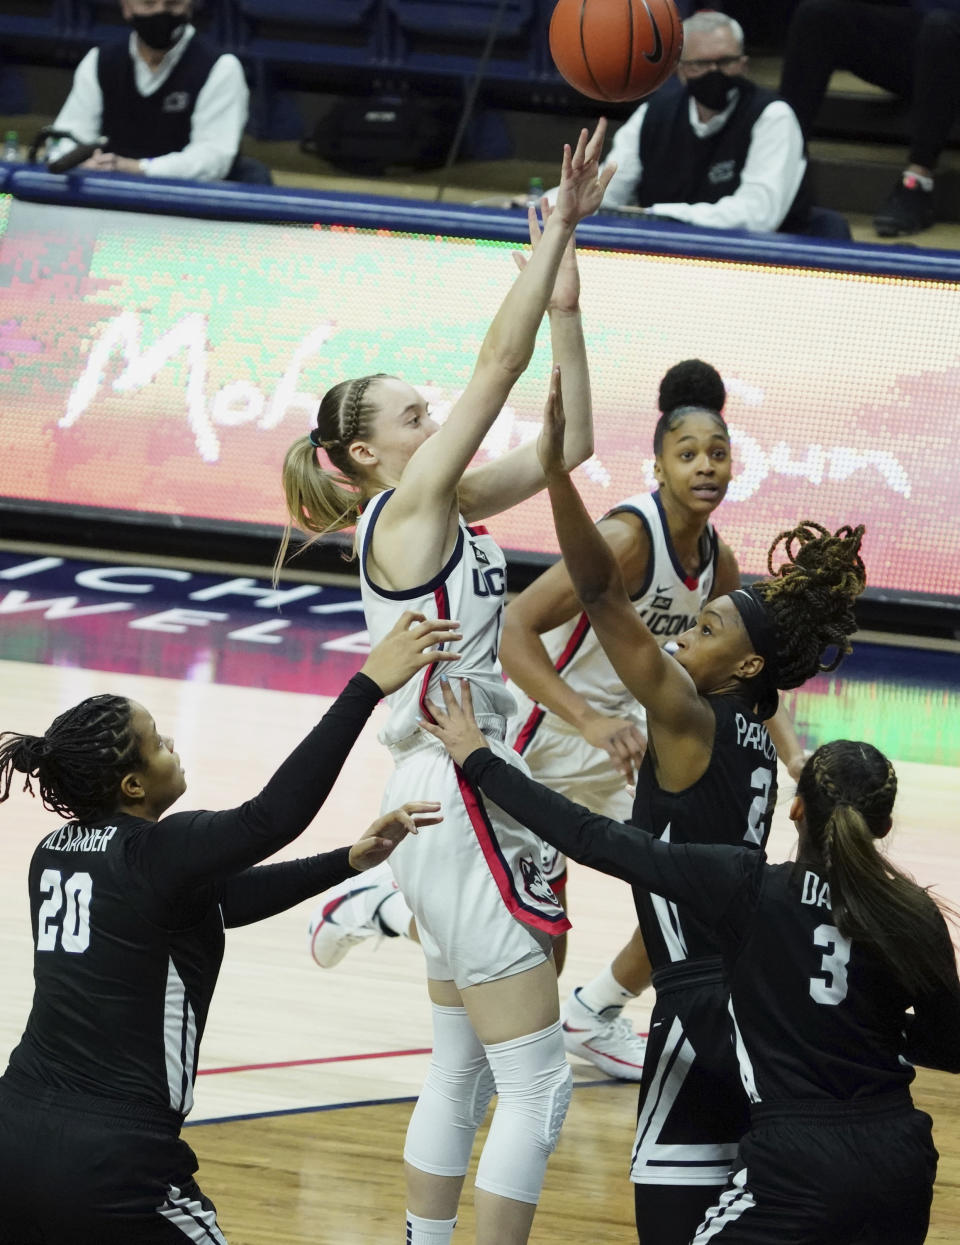 Connecticut guard Paige Bueckers (5) shoots against the Butler in the first half of an NCAA college basketball game Tuesday, Jan. 19, 2021, in Storrs, Conn. (David Butler II/Pool Photo via AP)